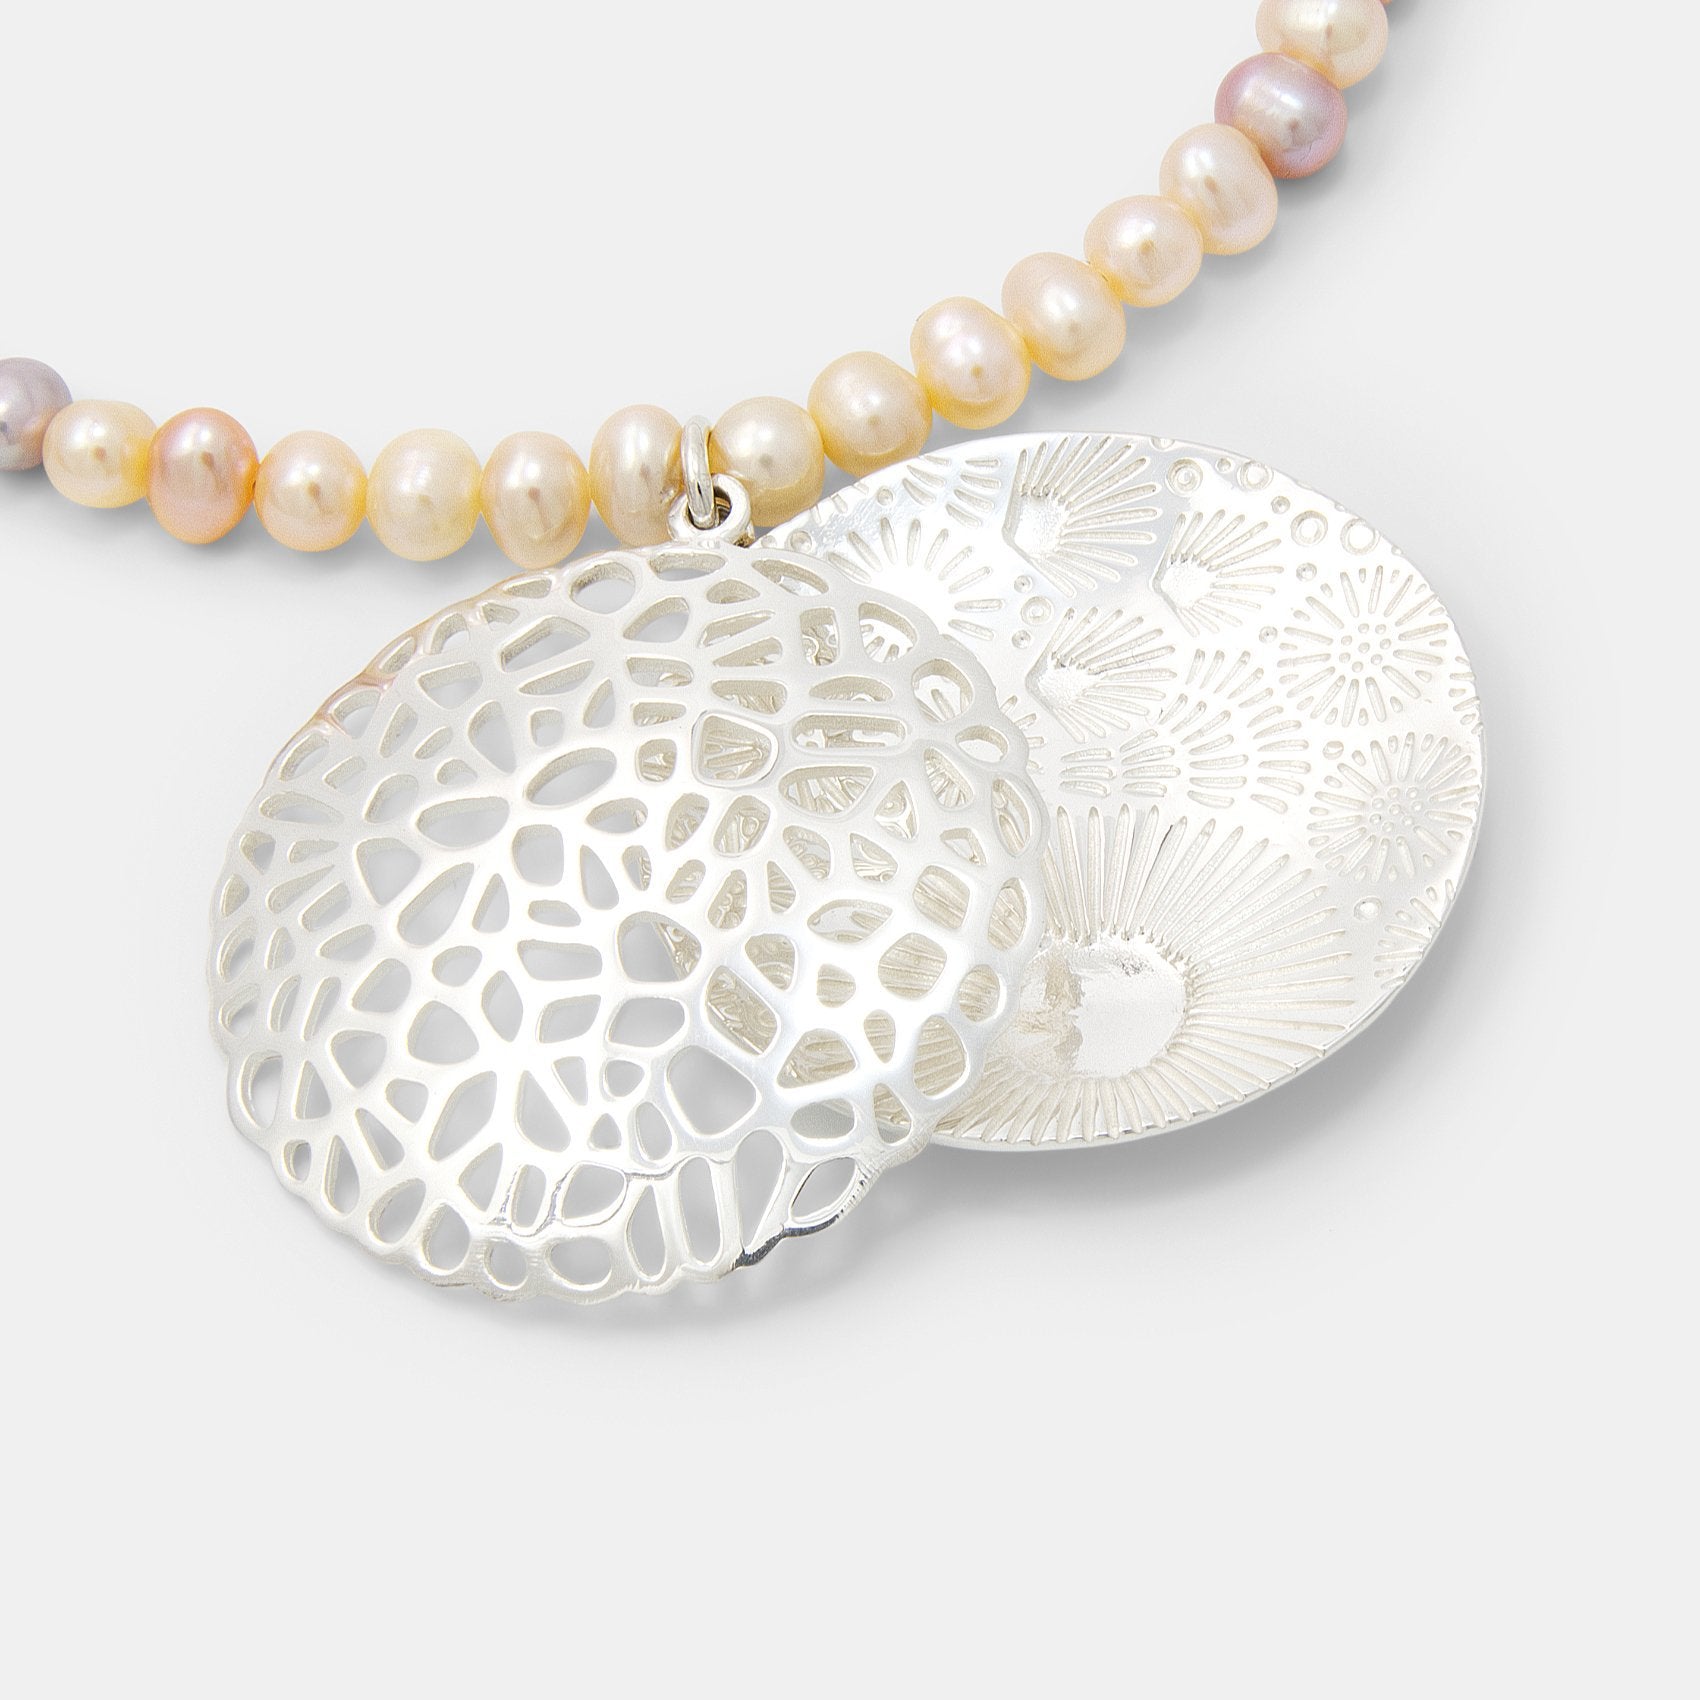 Coral reef open locket on peach pearl necklace - Simone Walsh Jewellery Australia